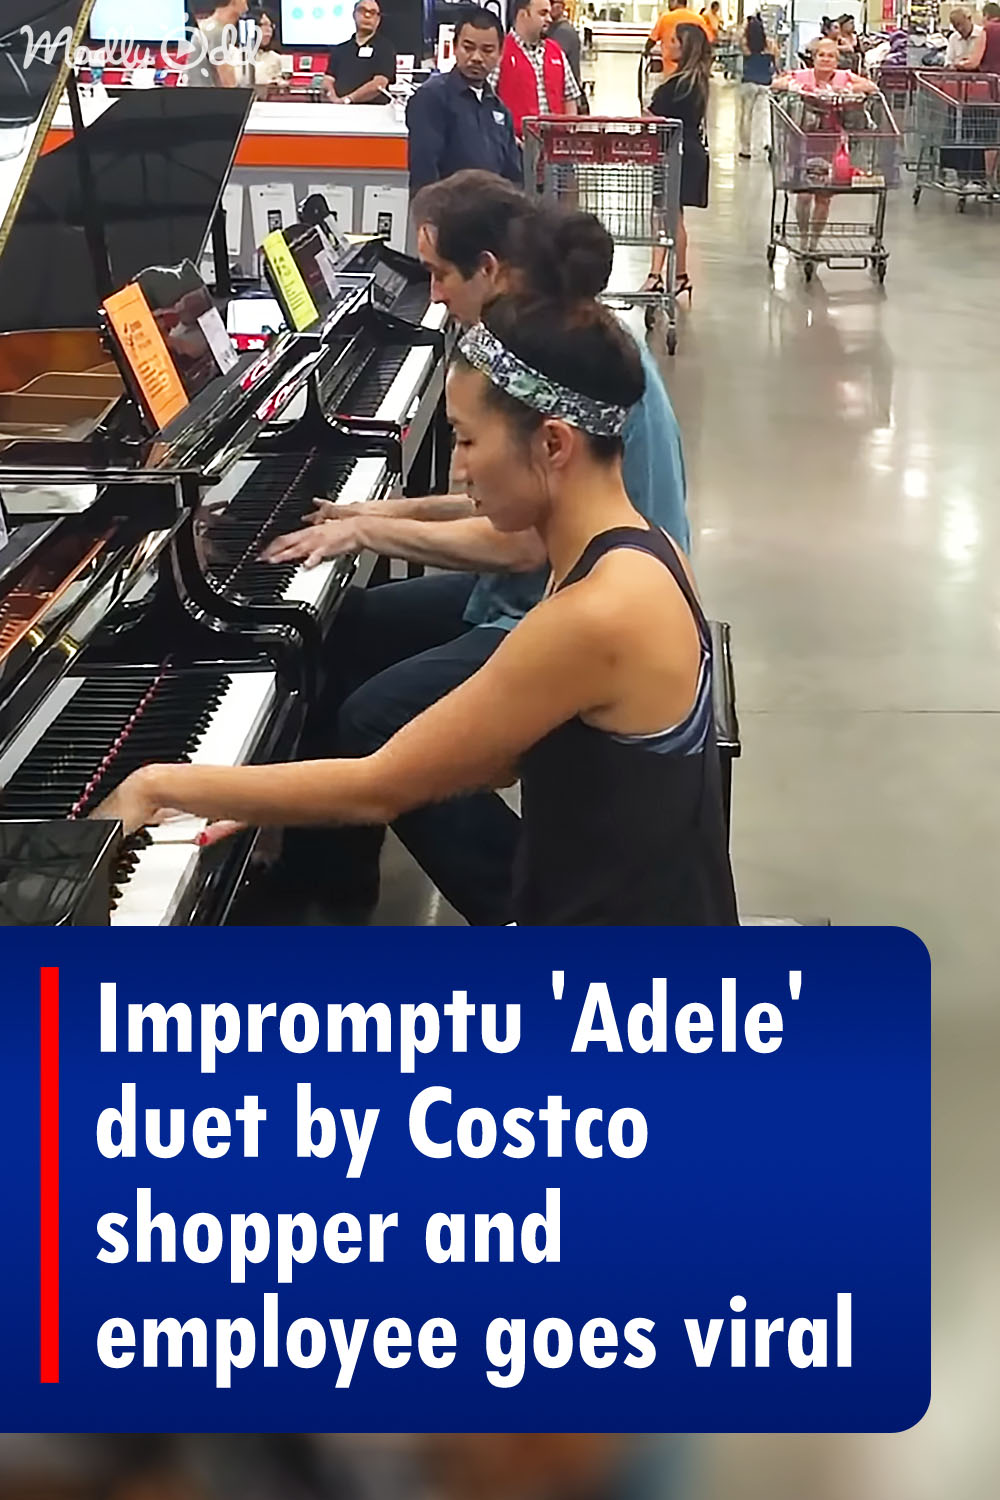 Impromptu \'Adele\' duet by Costco shopper and employee goes viral